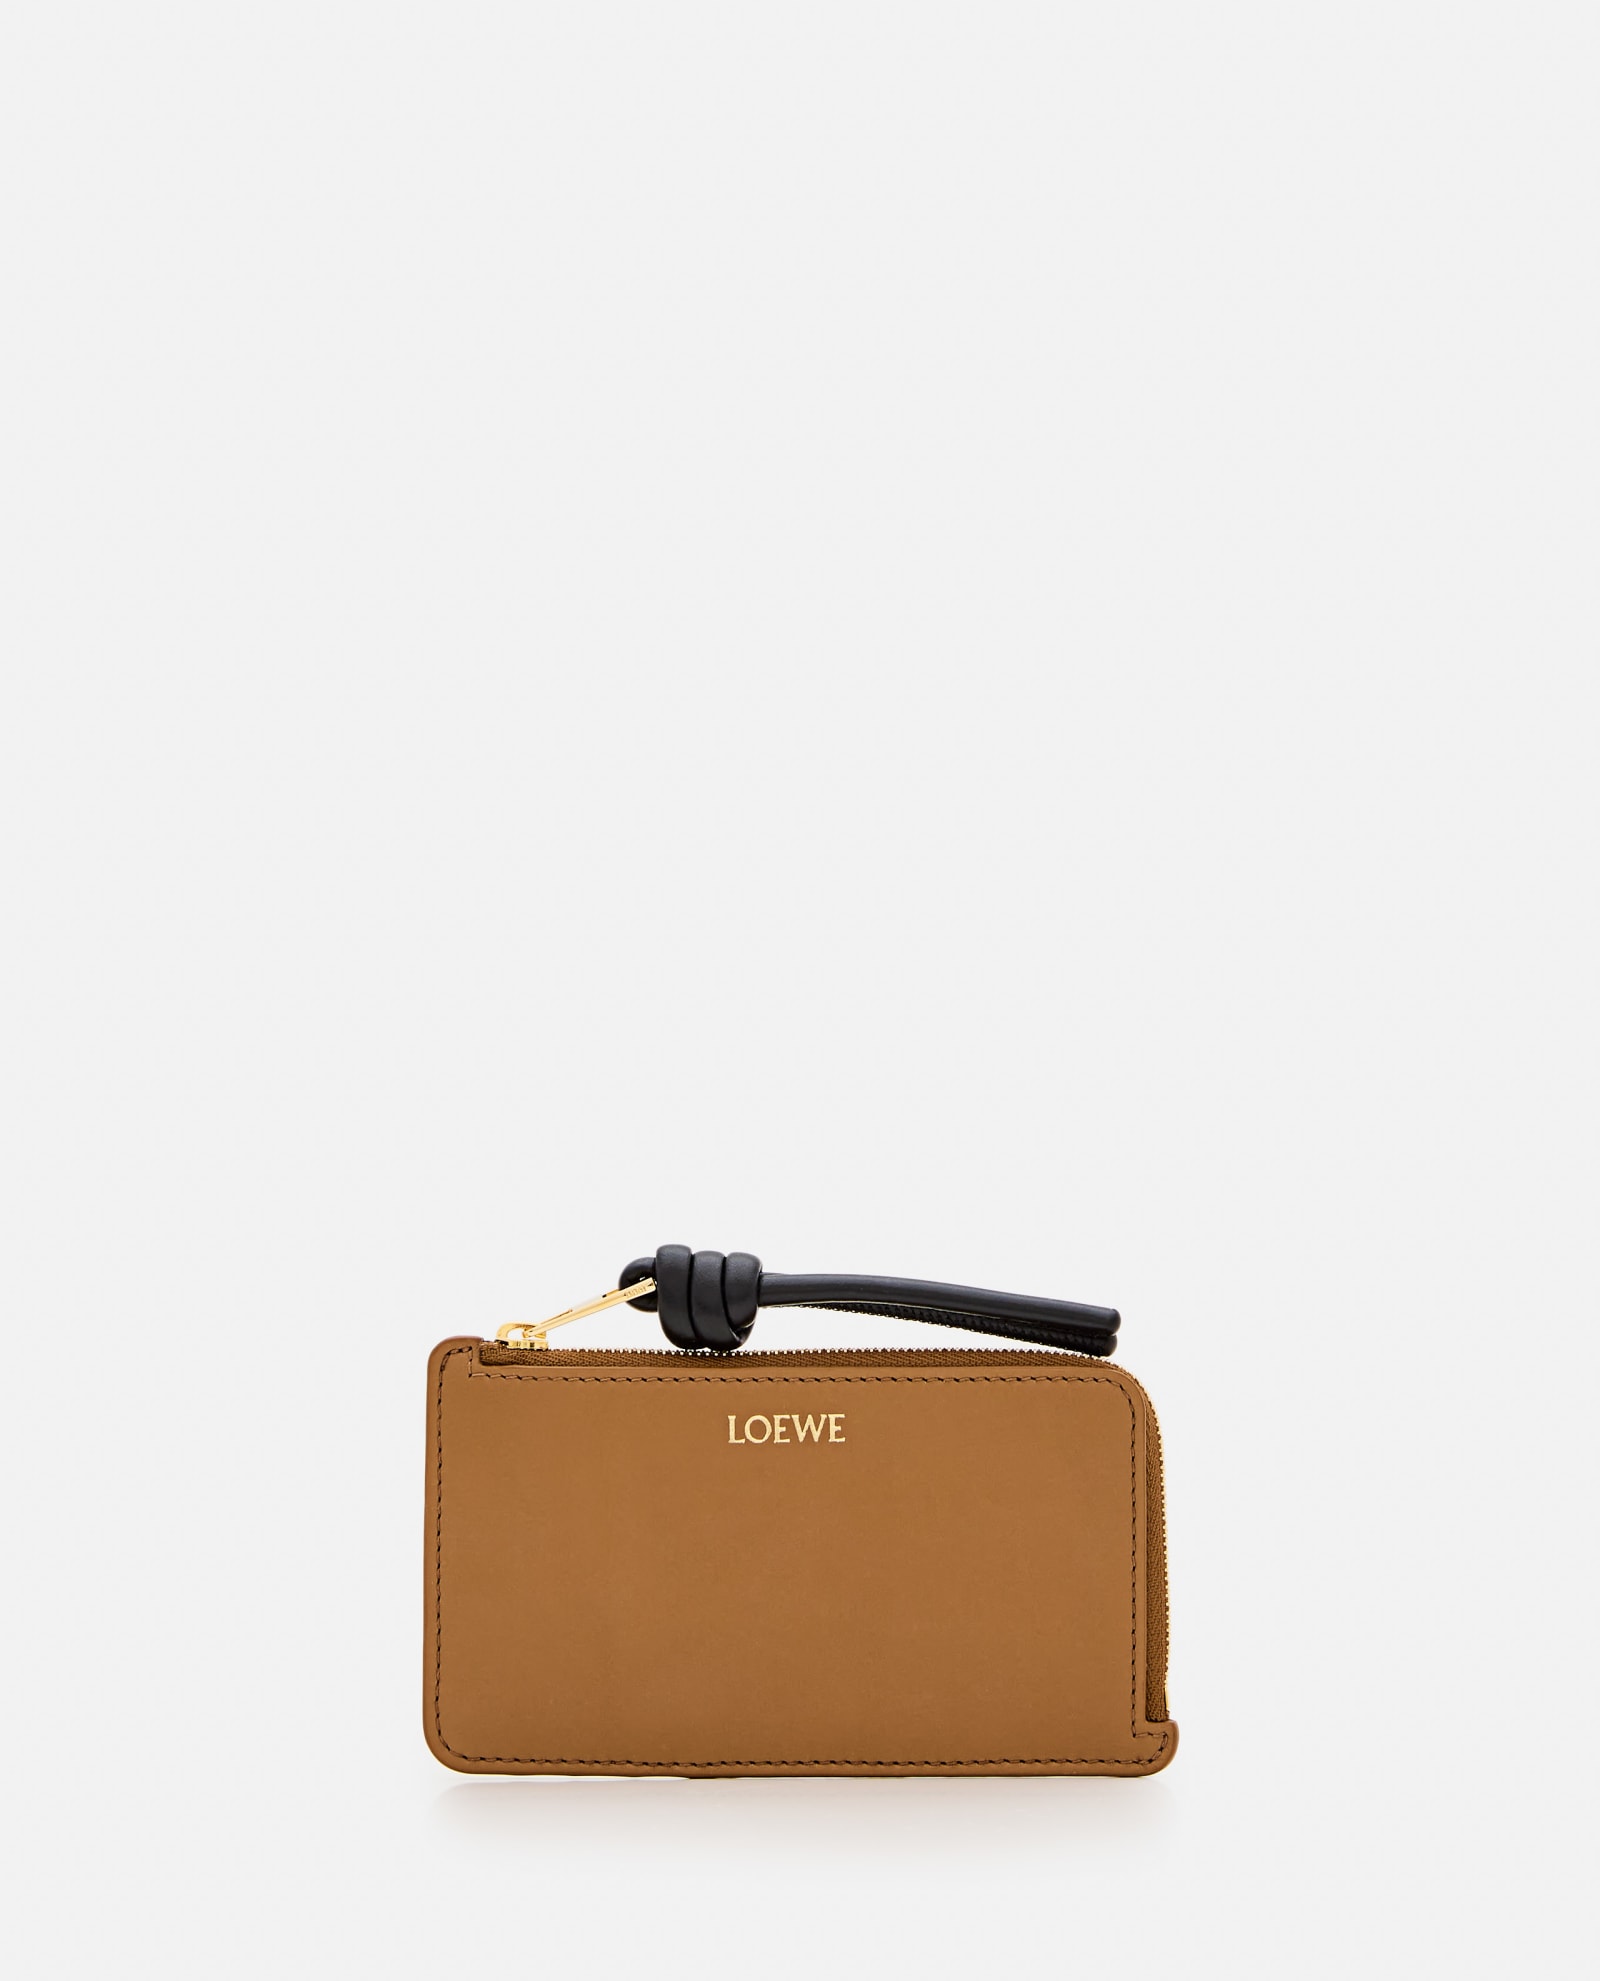 LOEWE KNOT COIN LEATHER CARDHOLDER